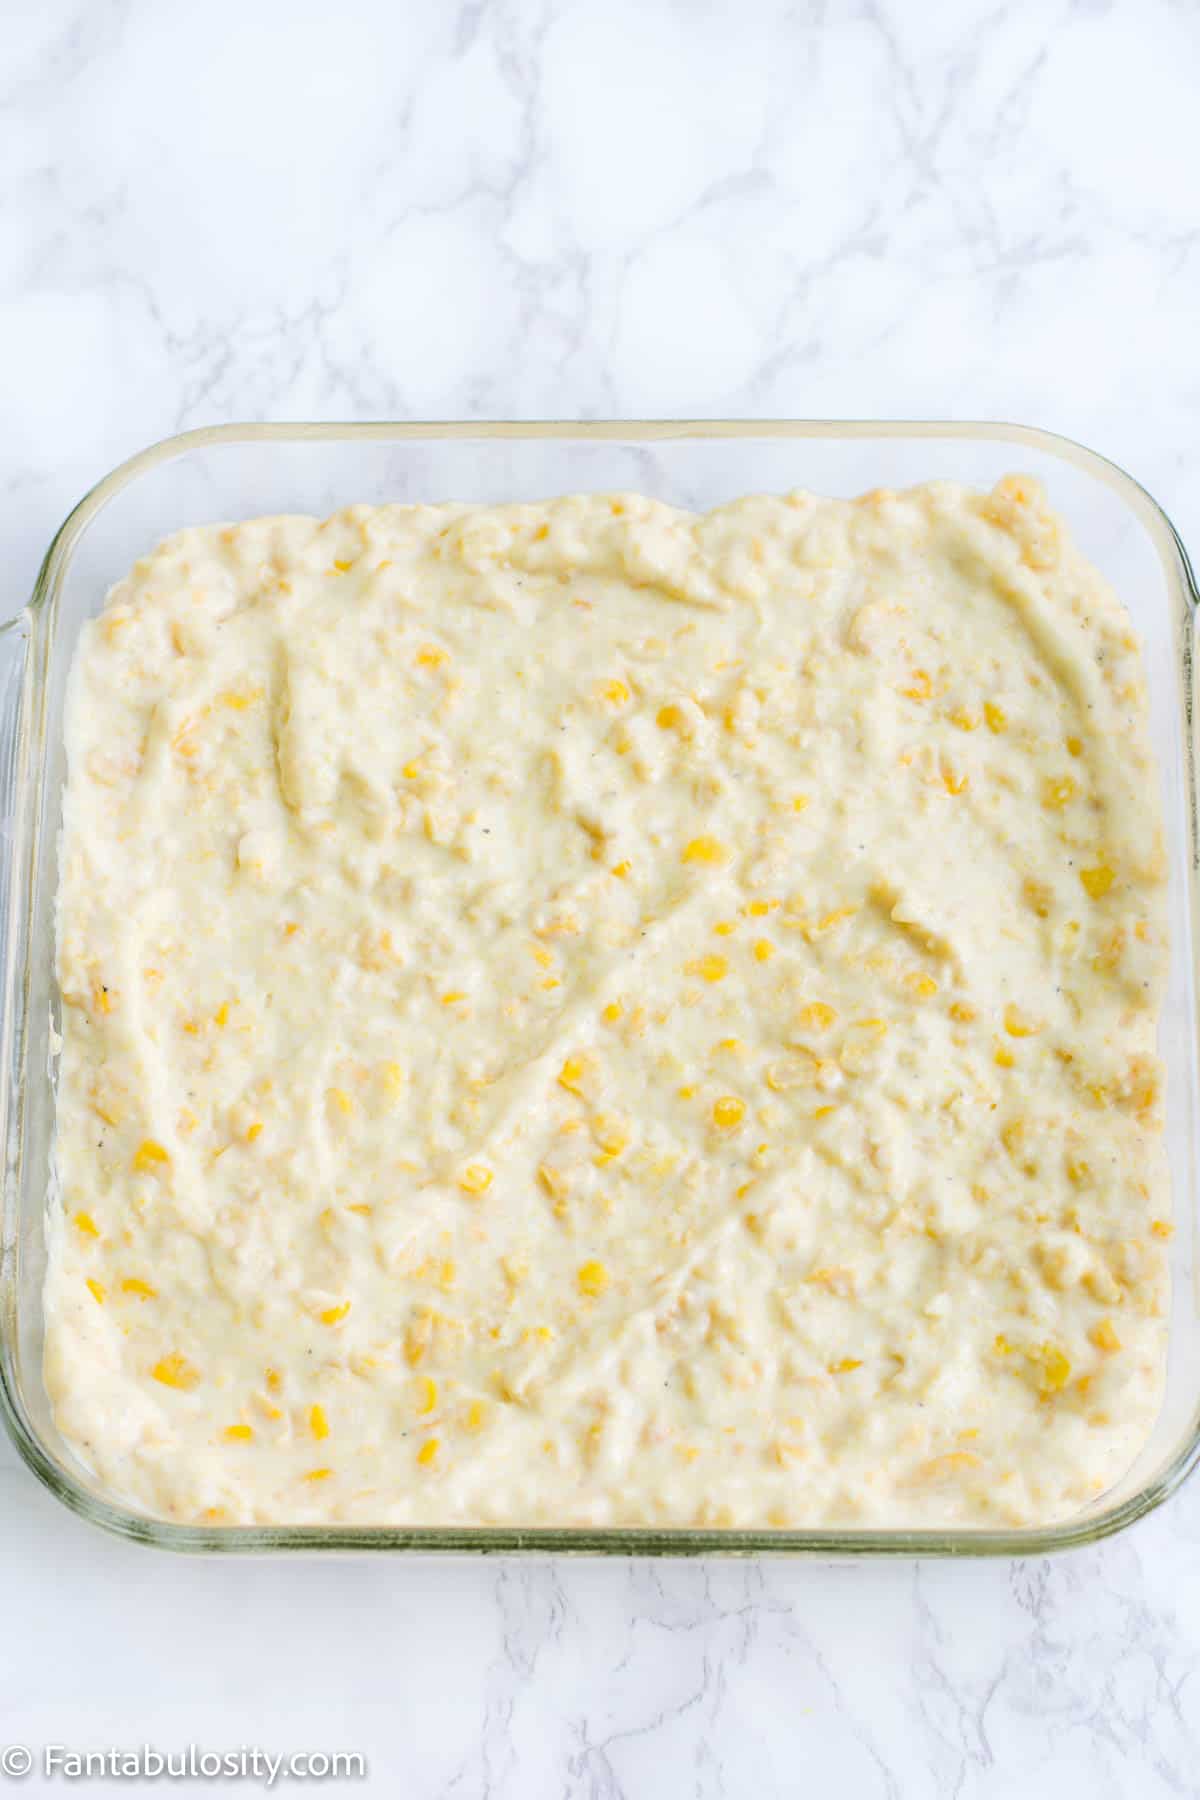 Corn casserole mix placed in greased baking dish